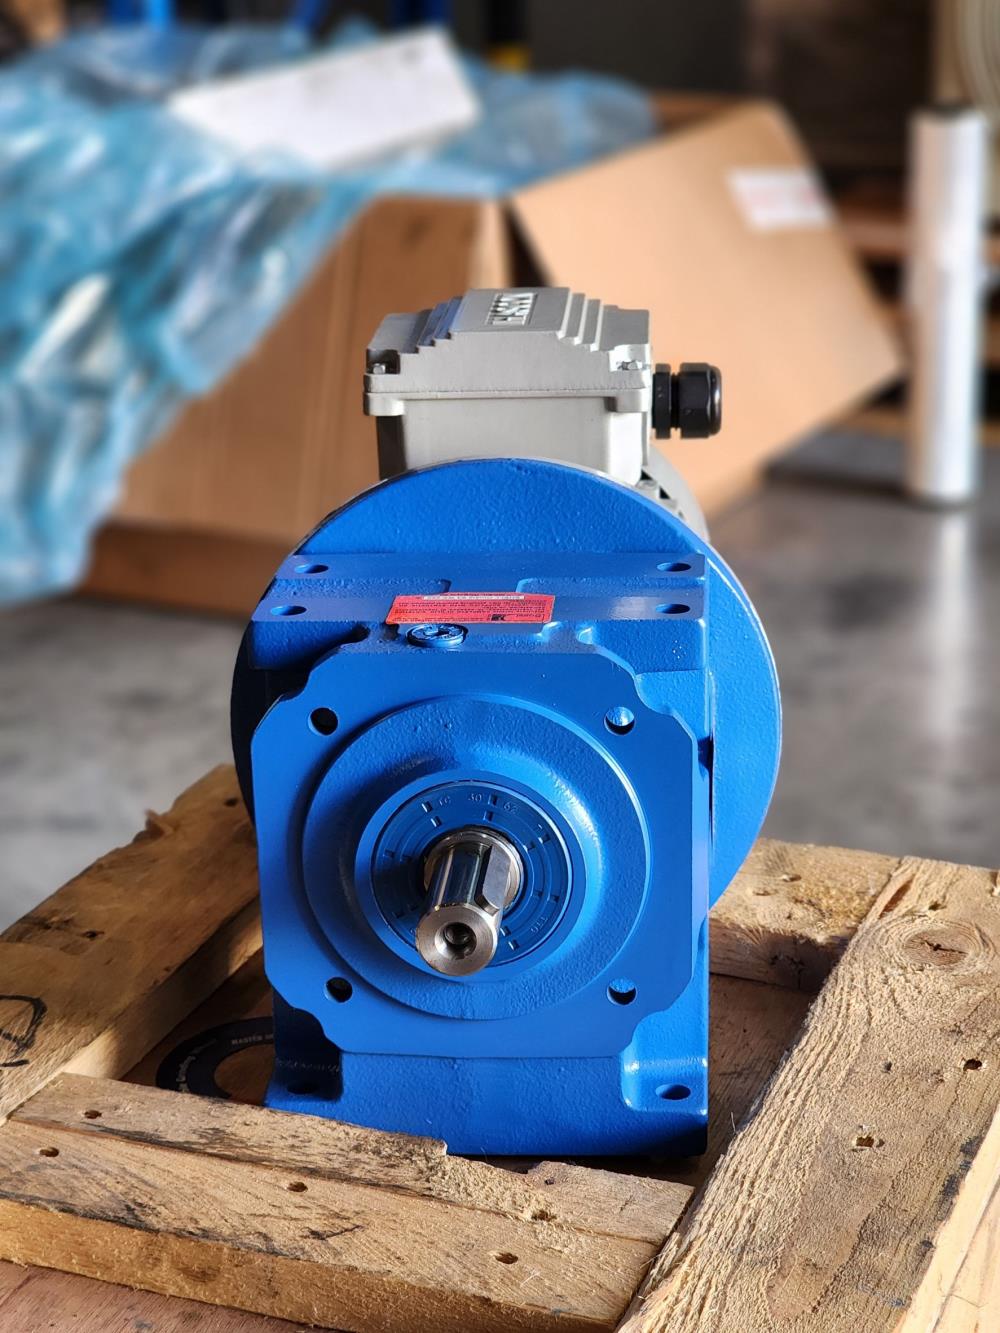 “ROSSI”-HELICAL GEAR MOTOR MR 3I 50 UC2A 19x200 Ratio : 18